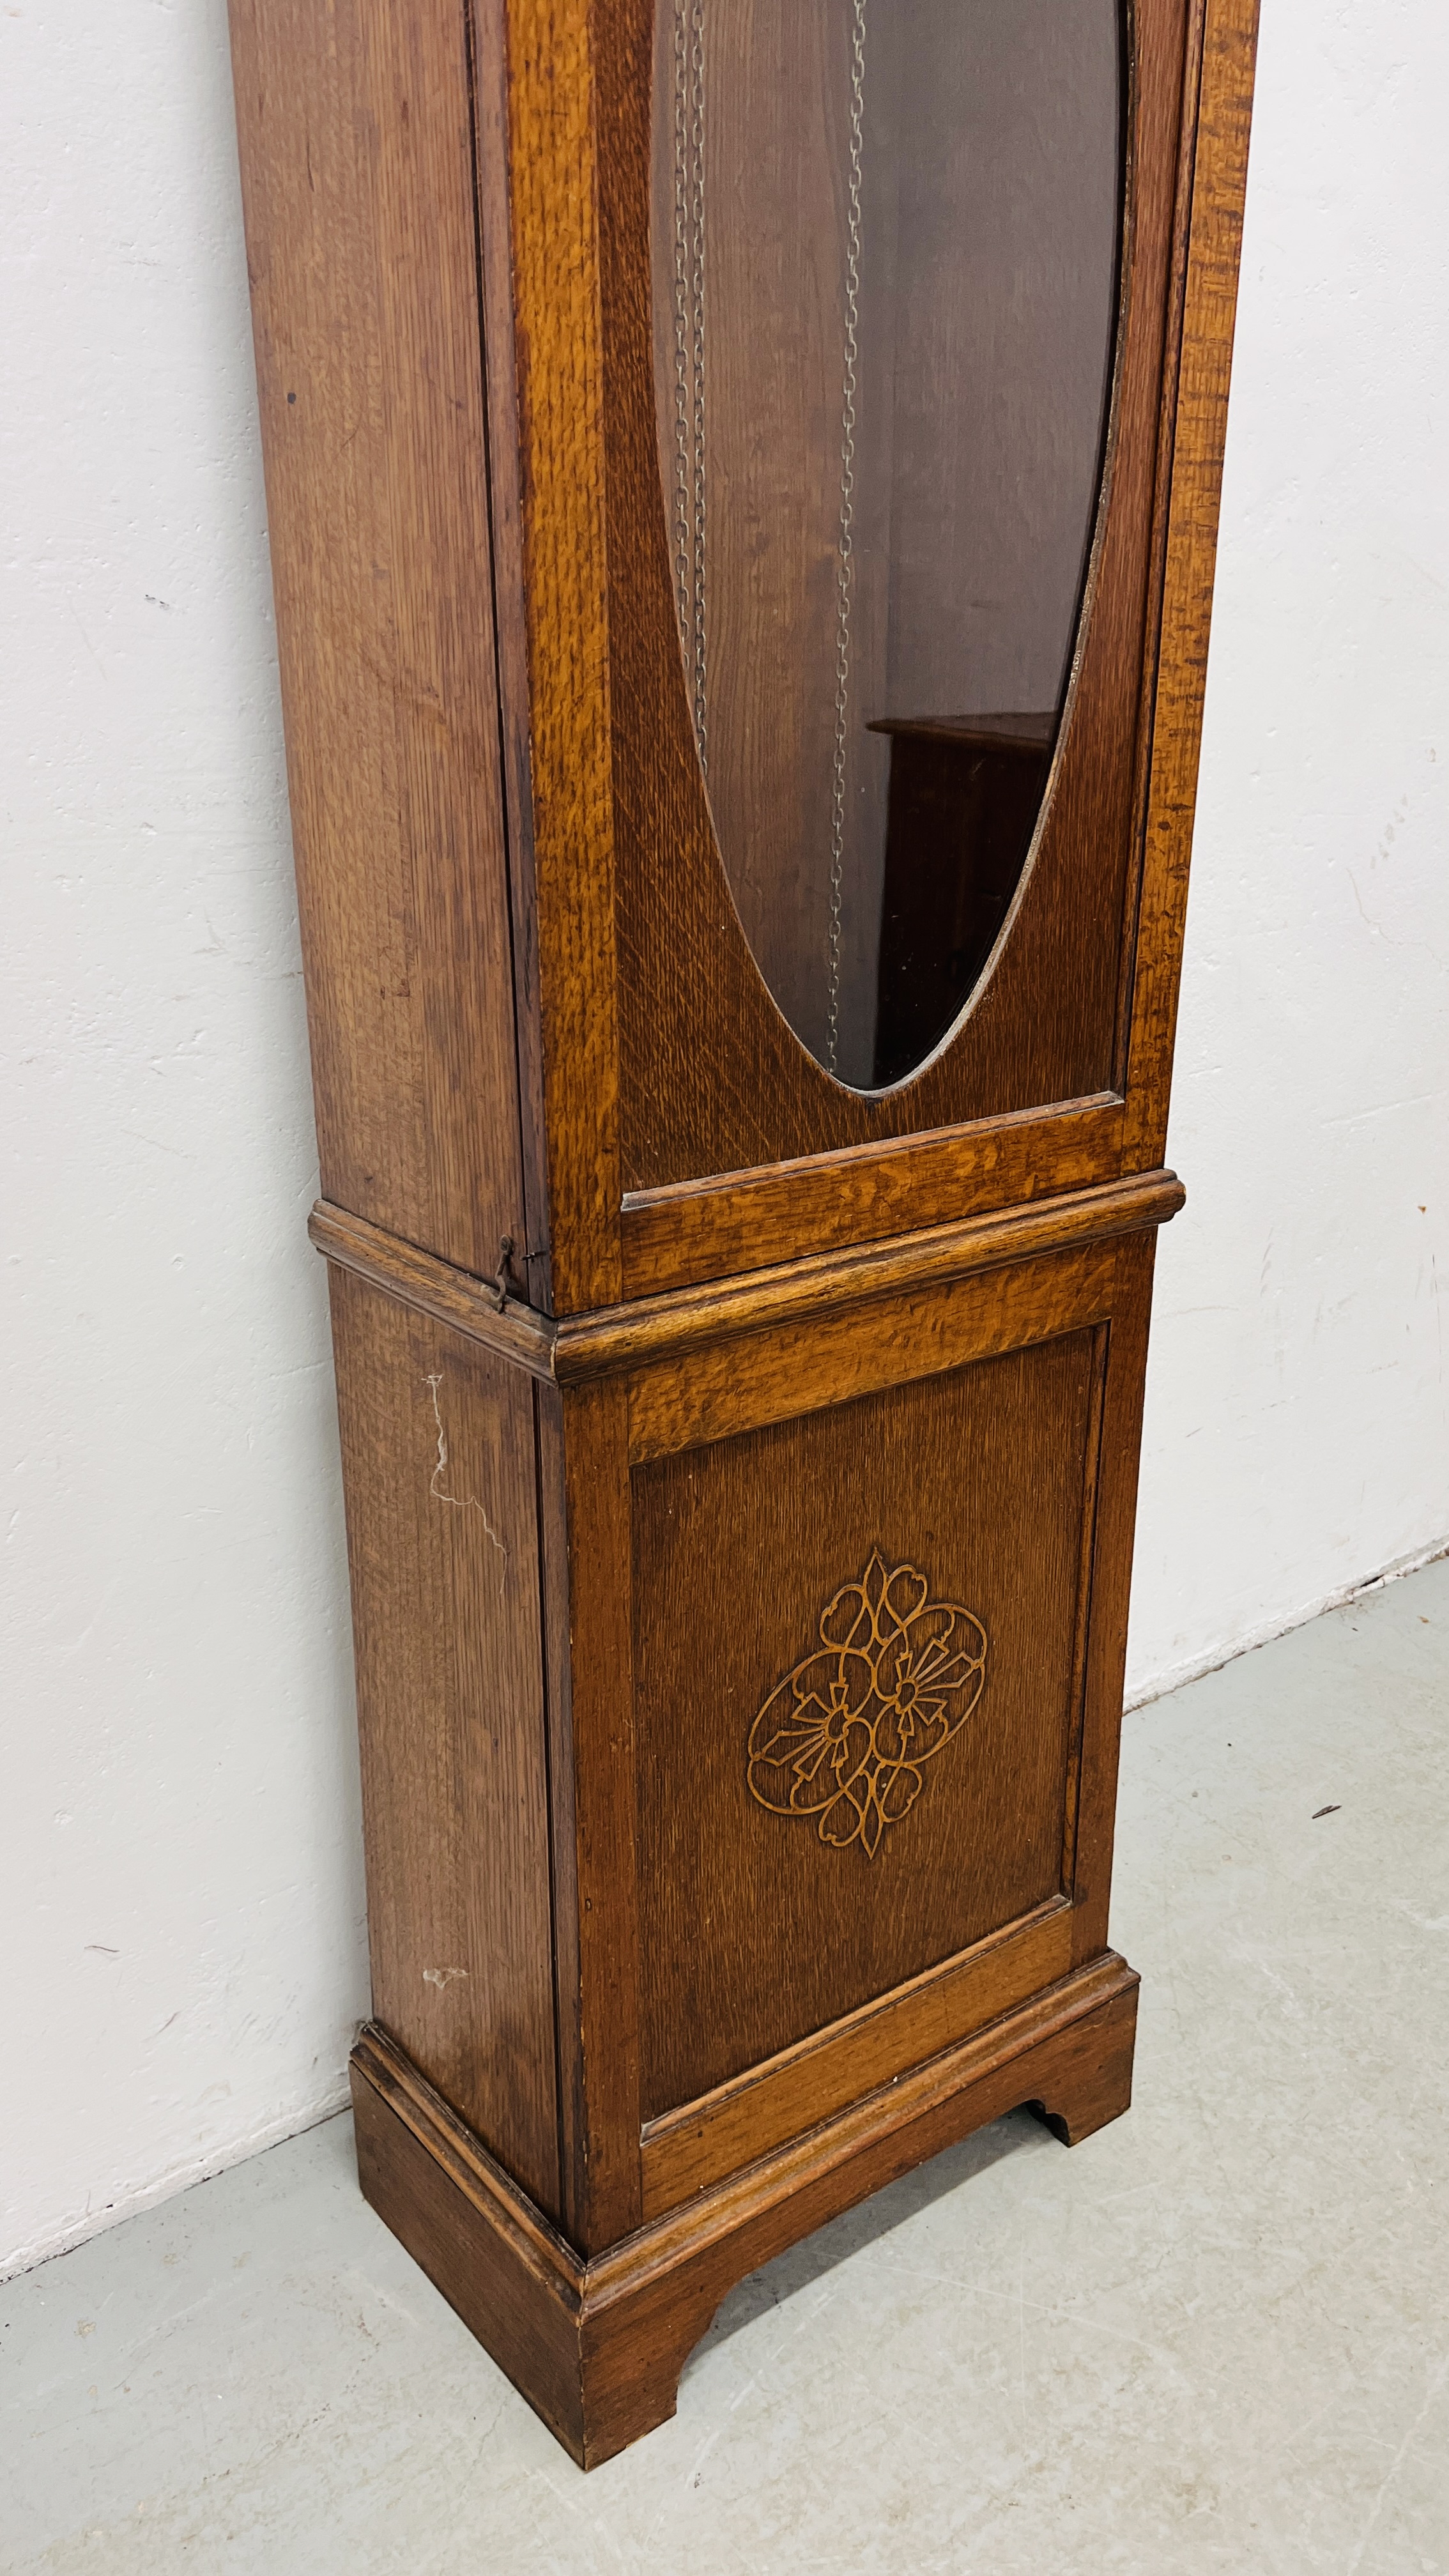 A GERMAN 1930's OAK CASED LONG CASE CLOCK WITH WESTMINSTER CHIME. - Image 4 of 8